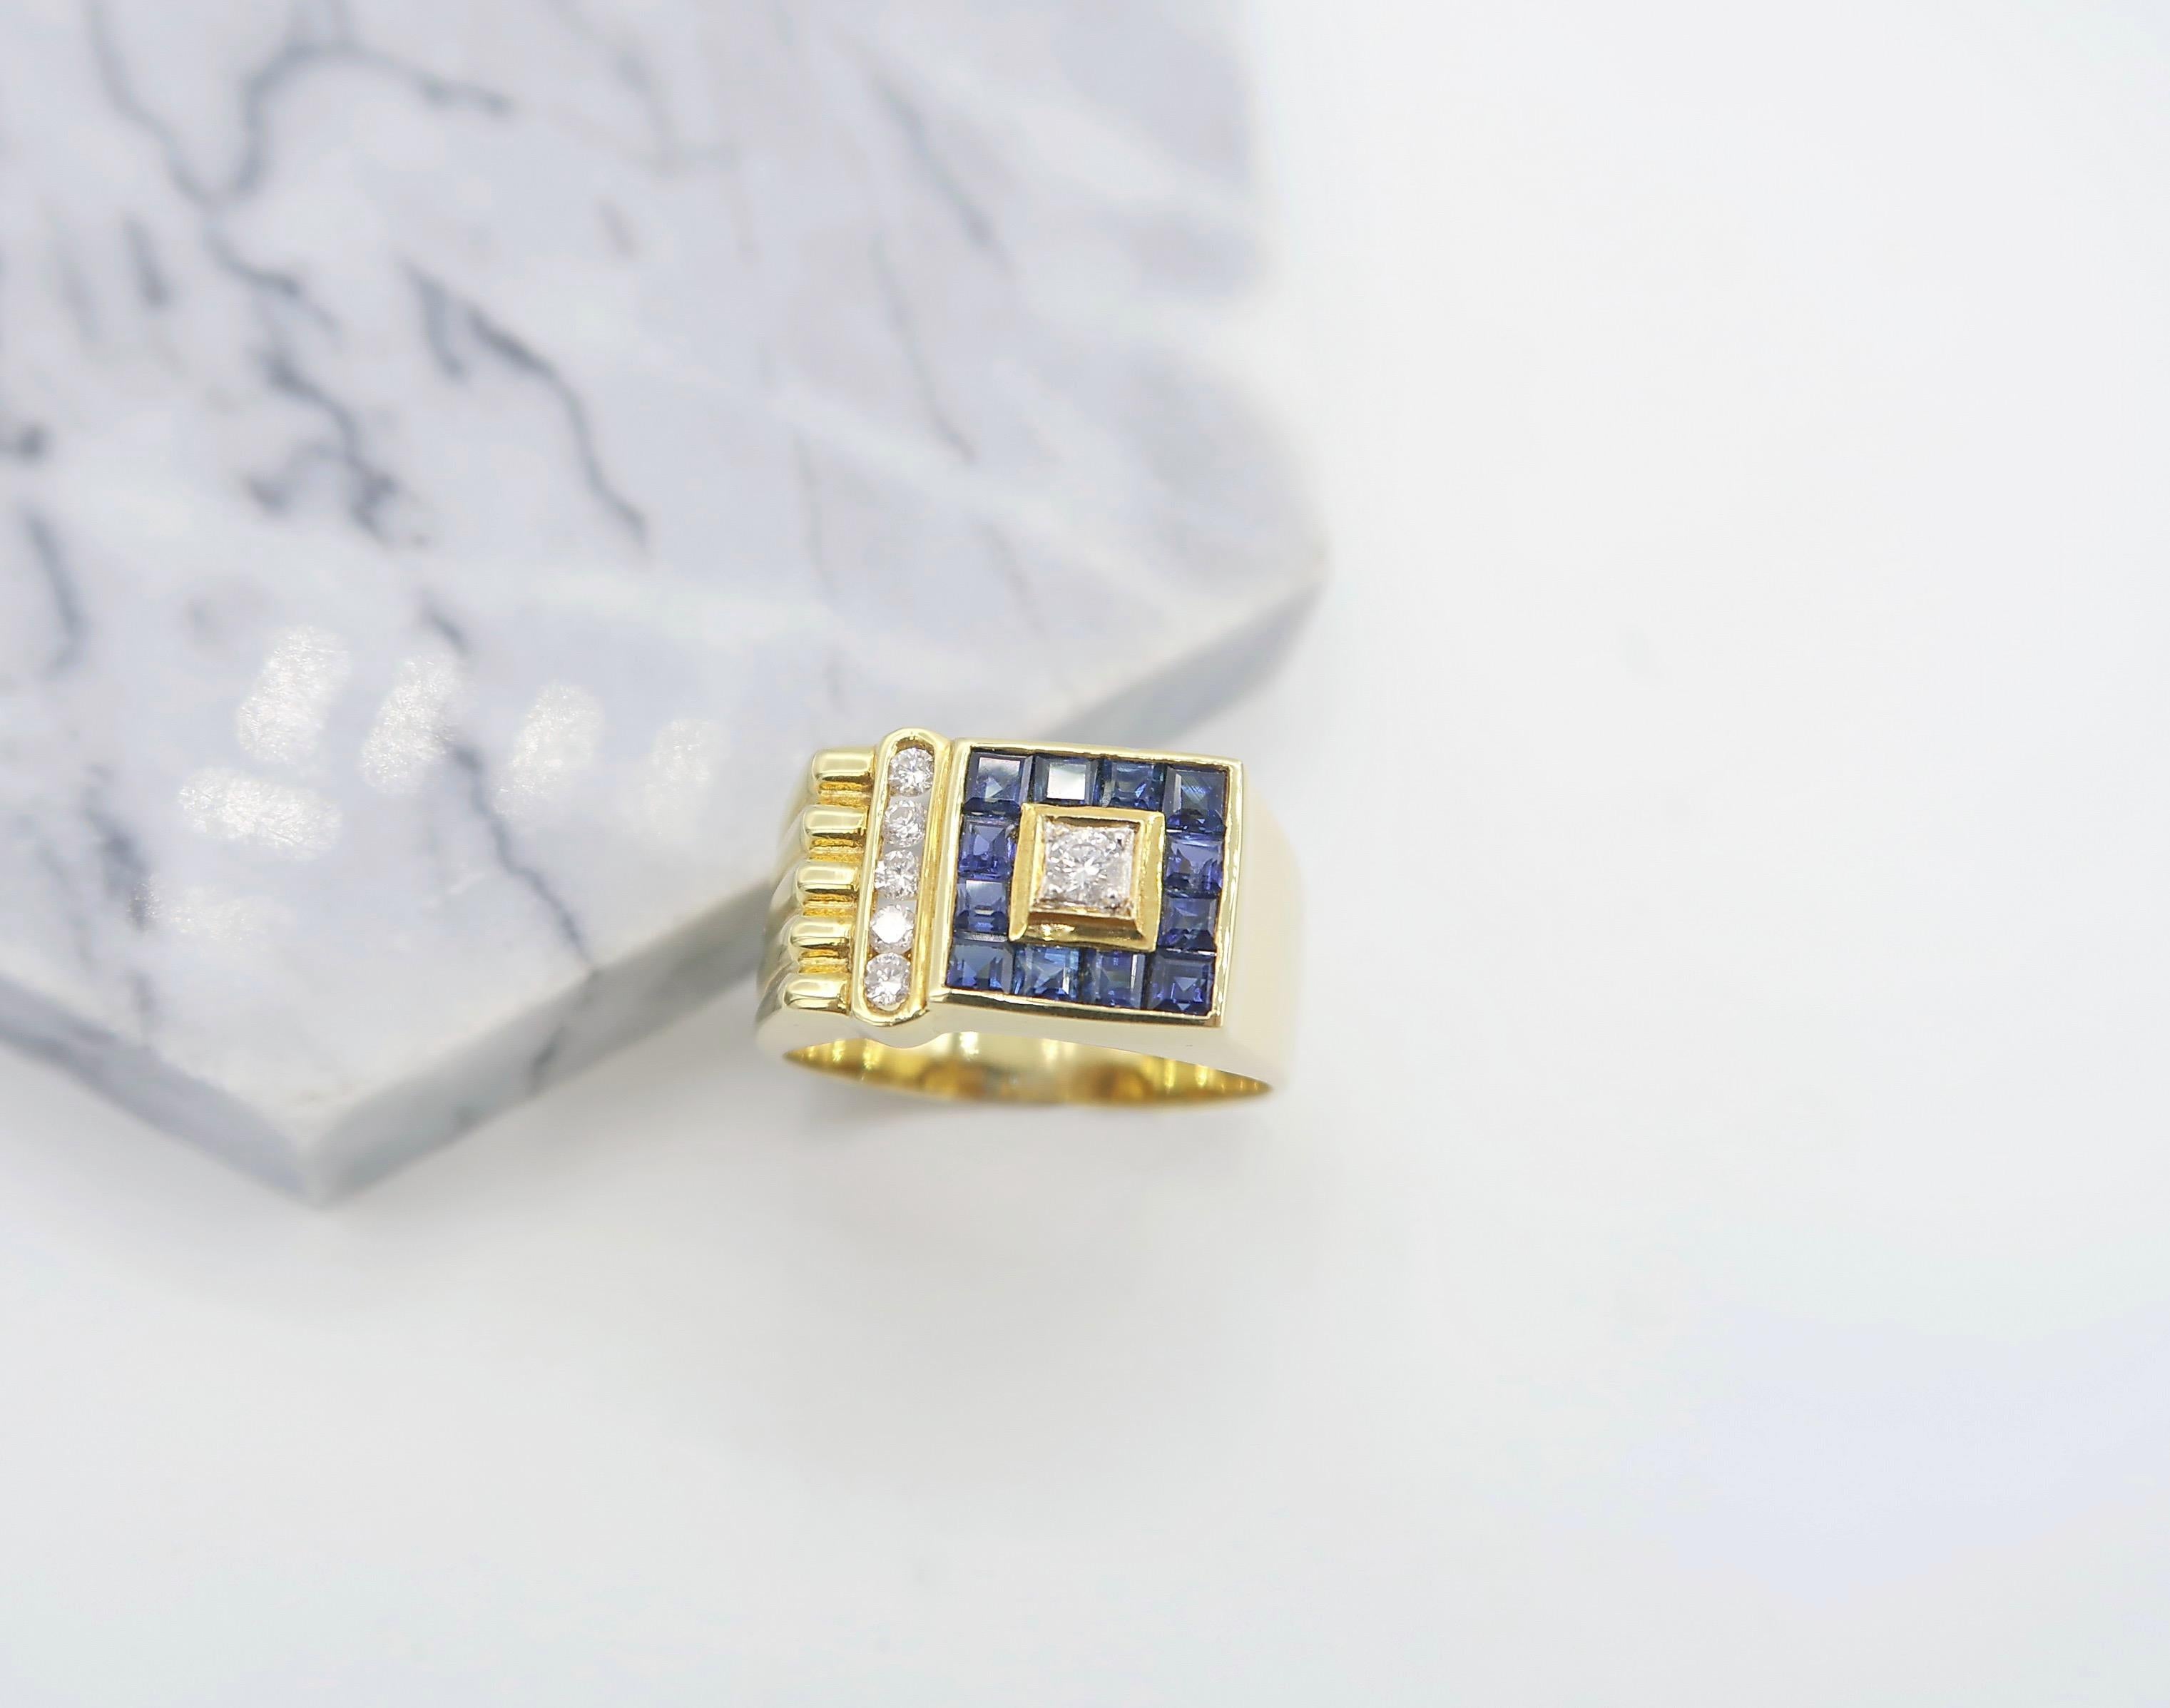 Square Blue Sapphire Diamond Channel-Set Fluted 18K Yellow Gold Men's Ring

Gold: 18K Yellow Gold, 8.13 g
Sapphire: 2.94 ct
Diamond: 0.34 ct

Ring size: US 8 1/2, UK Q 3/4, 58 1/2

Please let us know should you wish to have the ring resized or